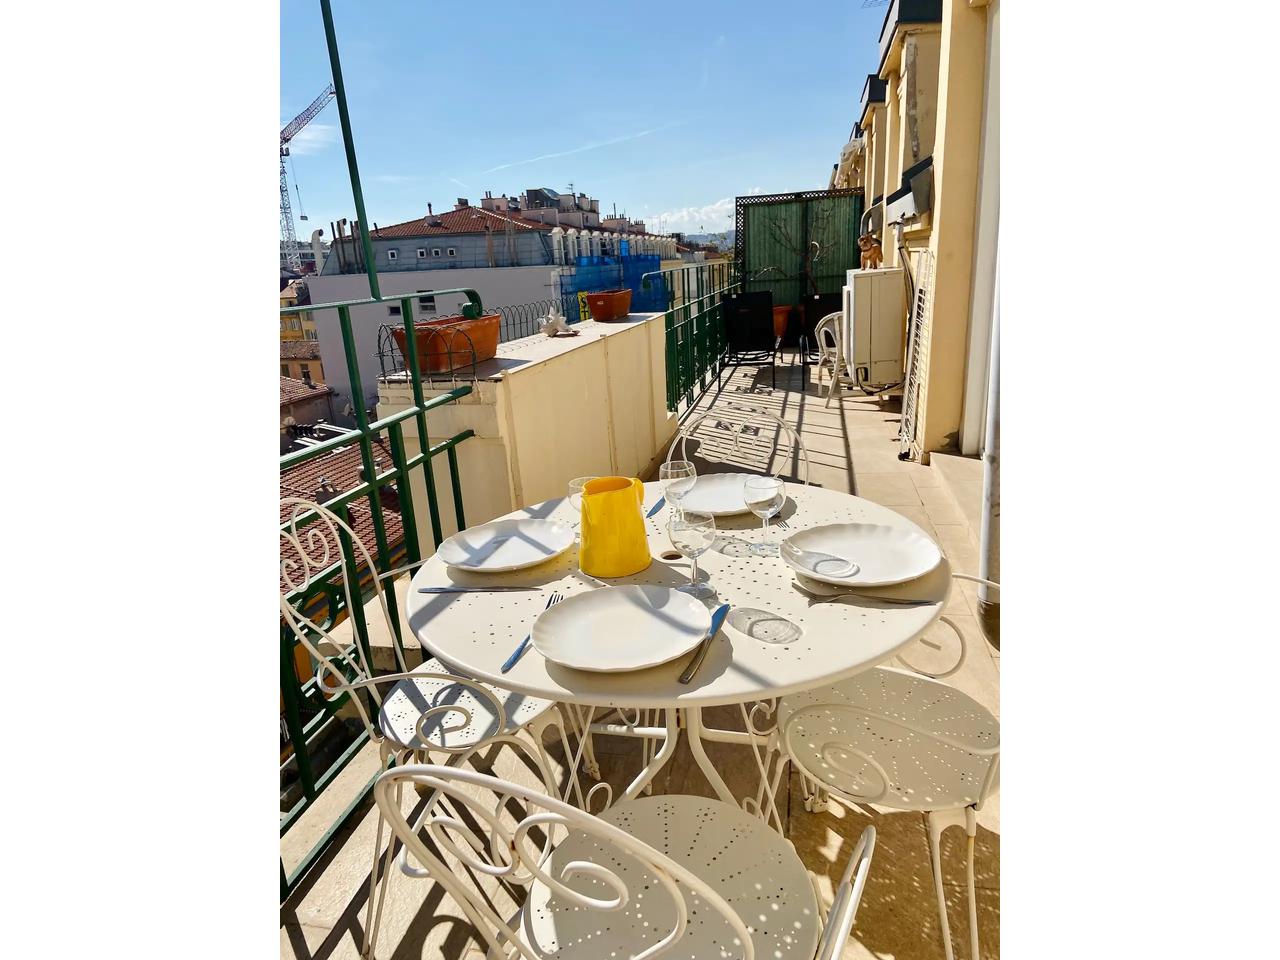 Nice Riviera - Agence Immobiliére Nice Côte d'Azur | Appartement  3 Rooms 65m2  for sale   740 000 €